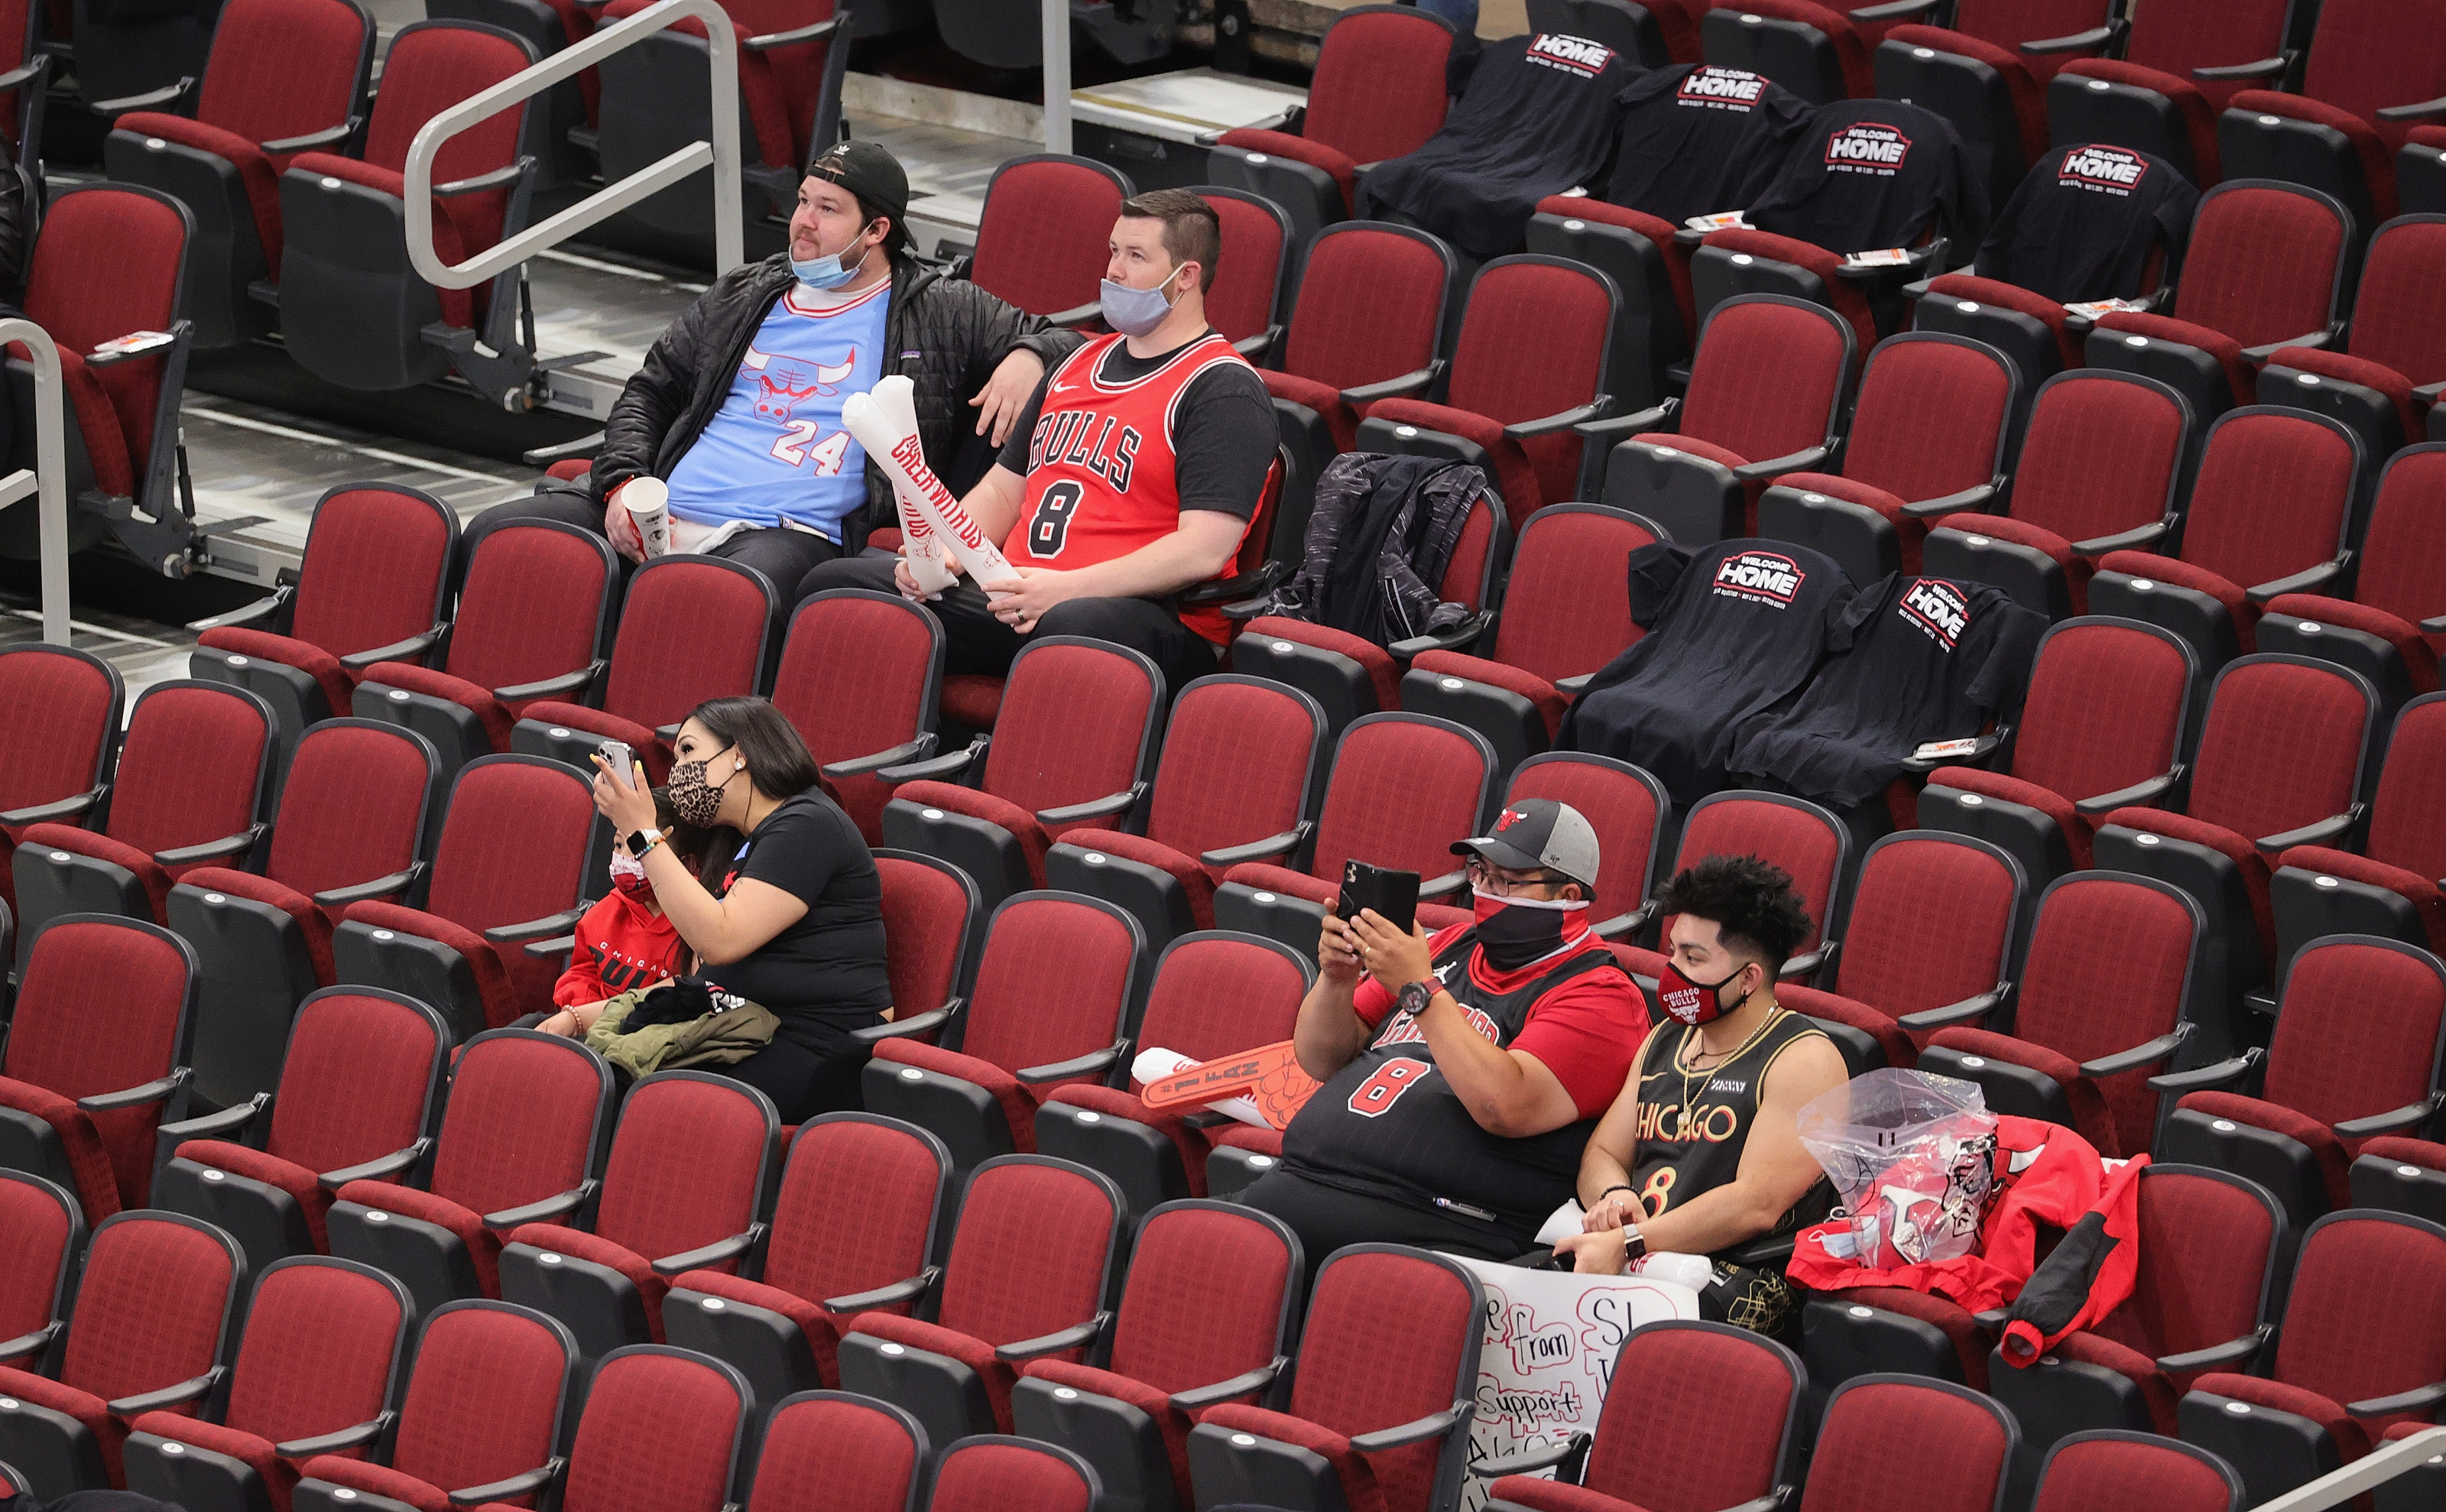 Online study ranks Chicago Bulls as second-happiest NBA fanbase